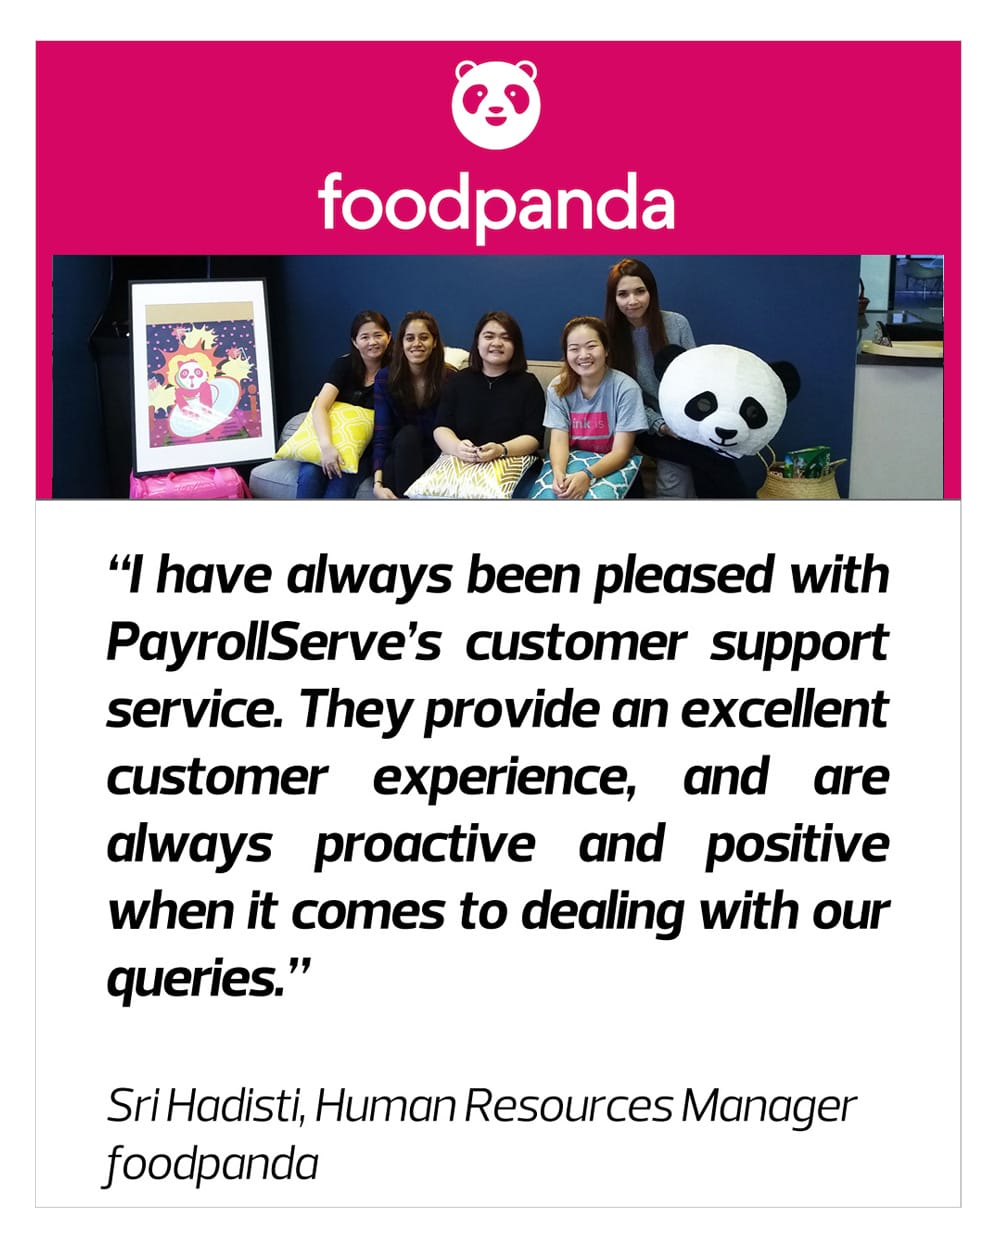 PayrollServe provide an excellent customer service experience and always proactive and positive when it comes to dealing with our queries- foodpanda